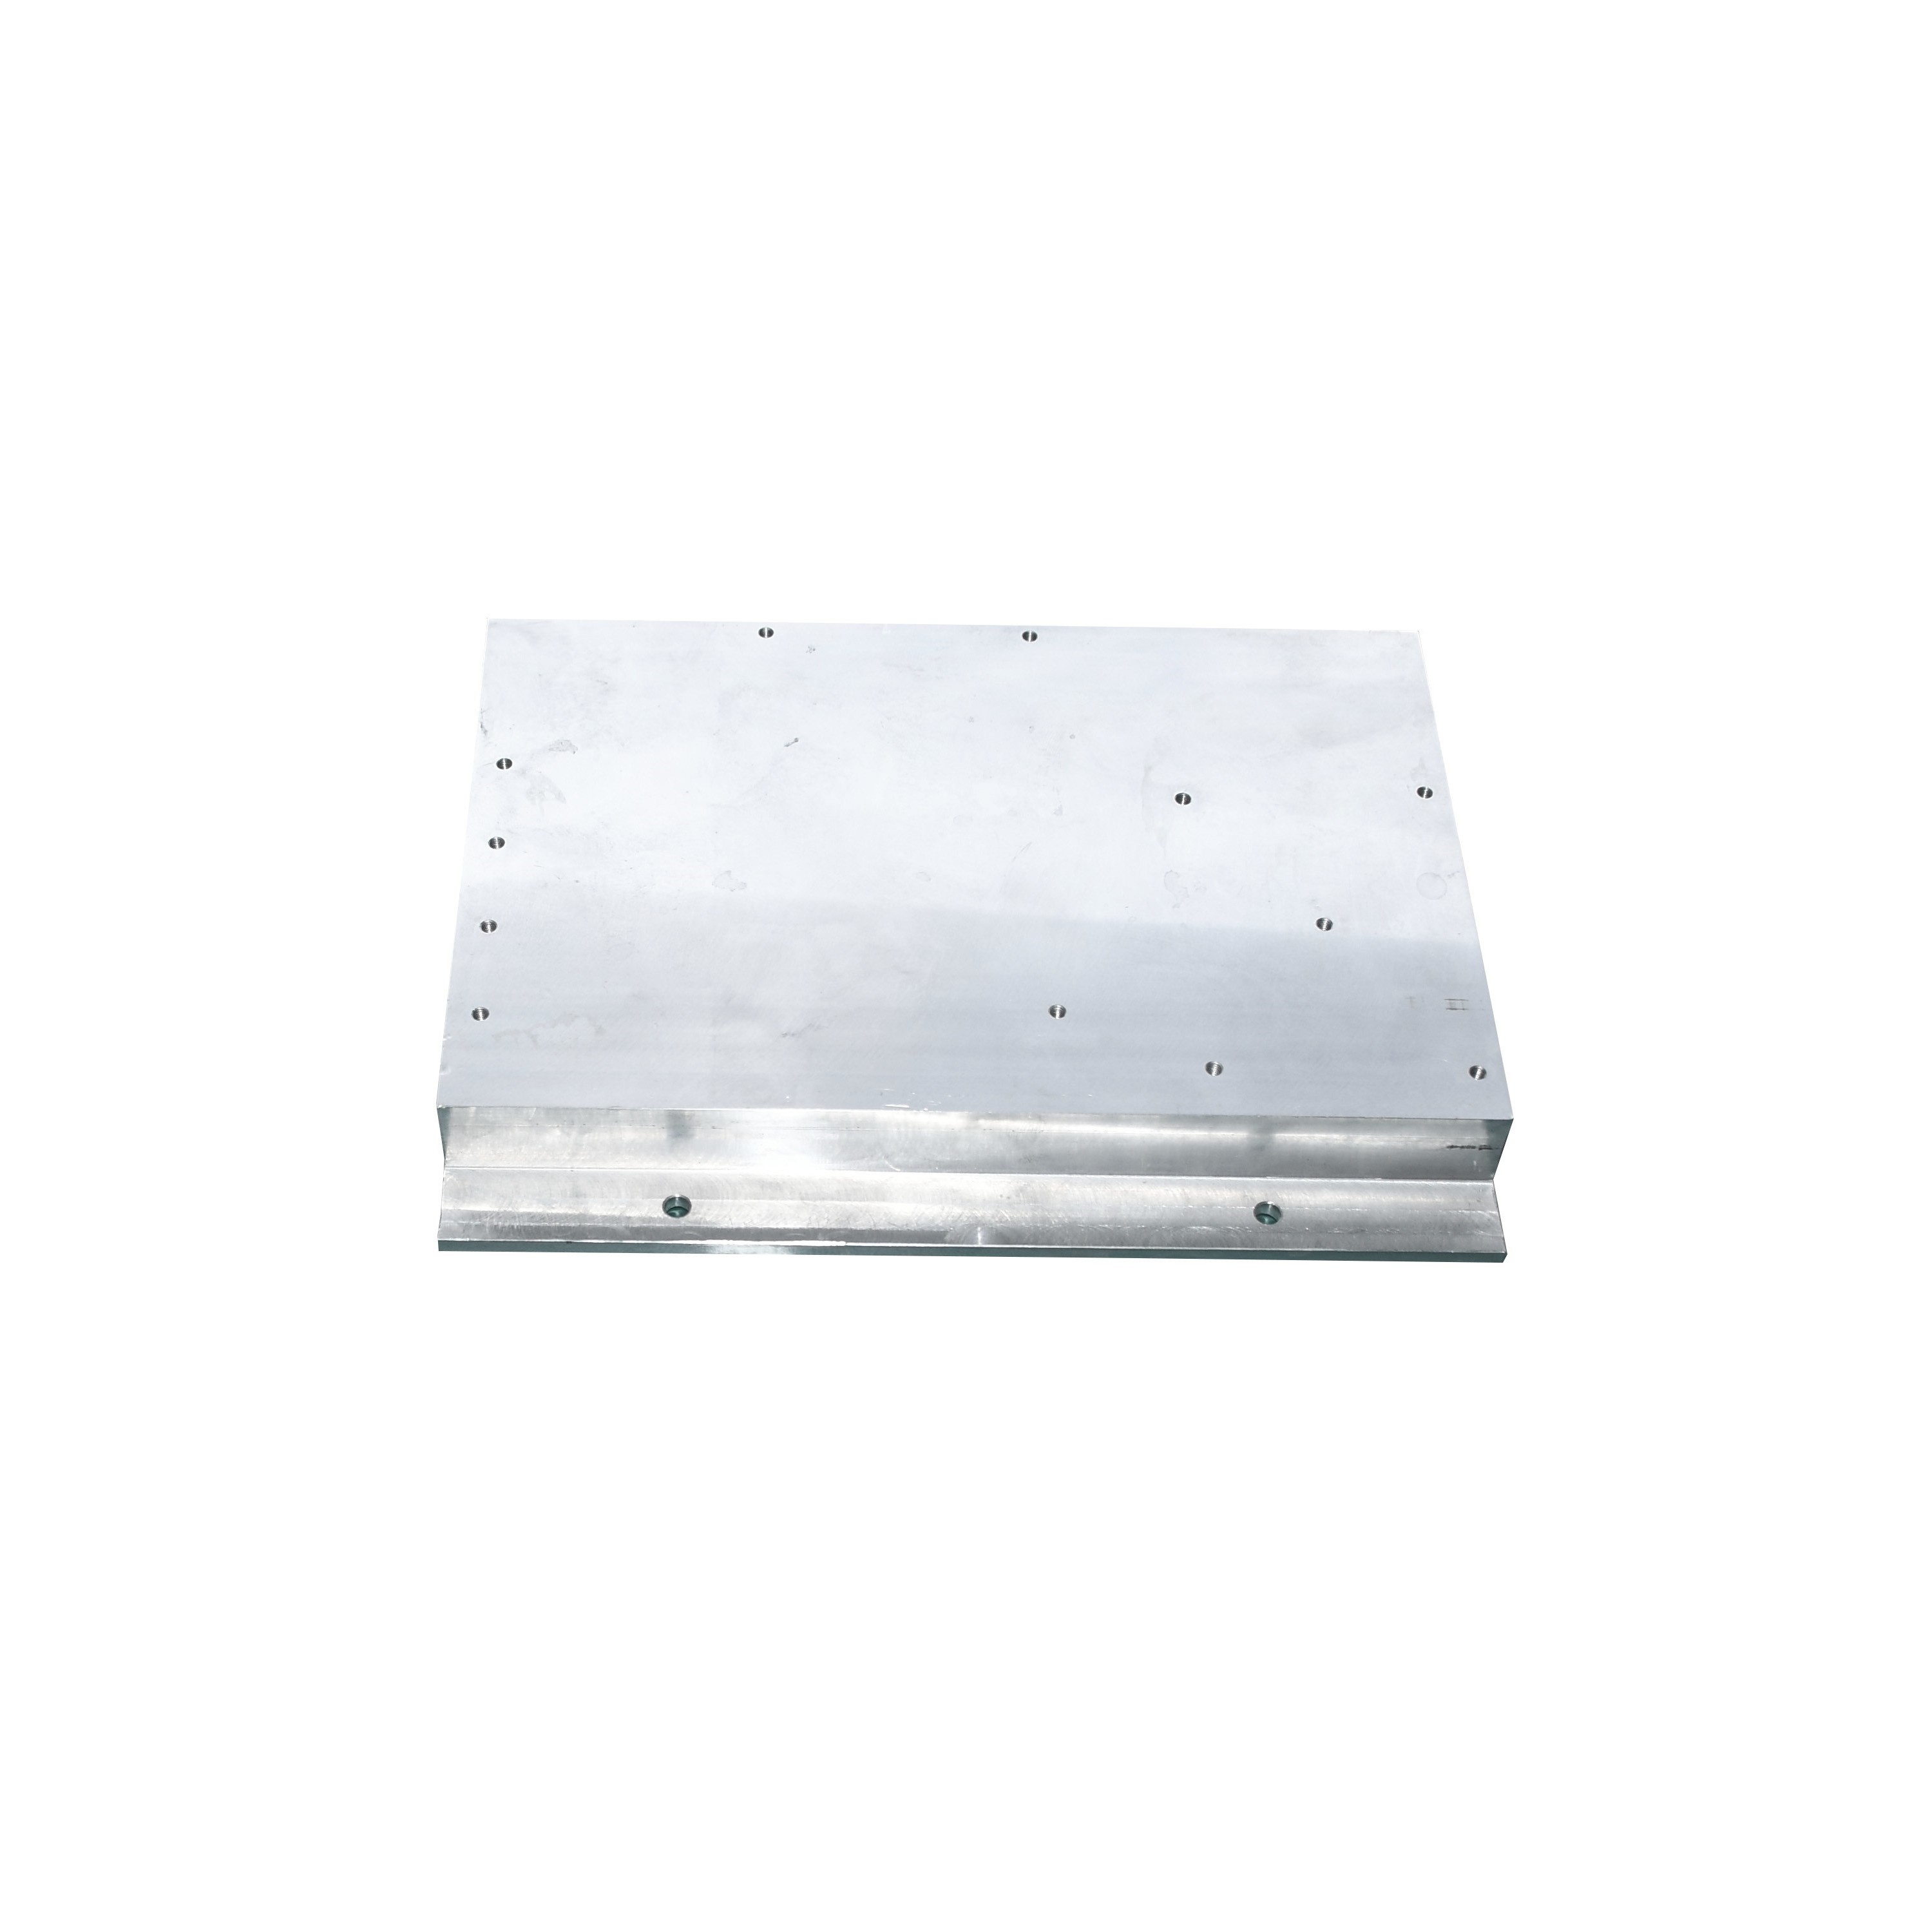 Vacuum Brazed Aluminum Cold Water Cooling Plate